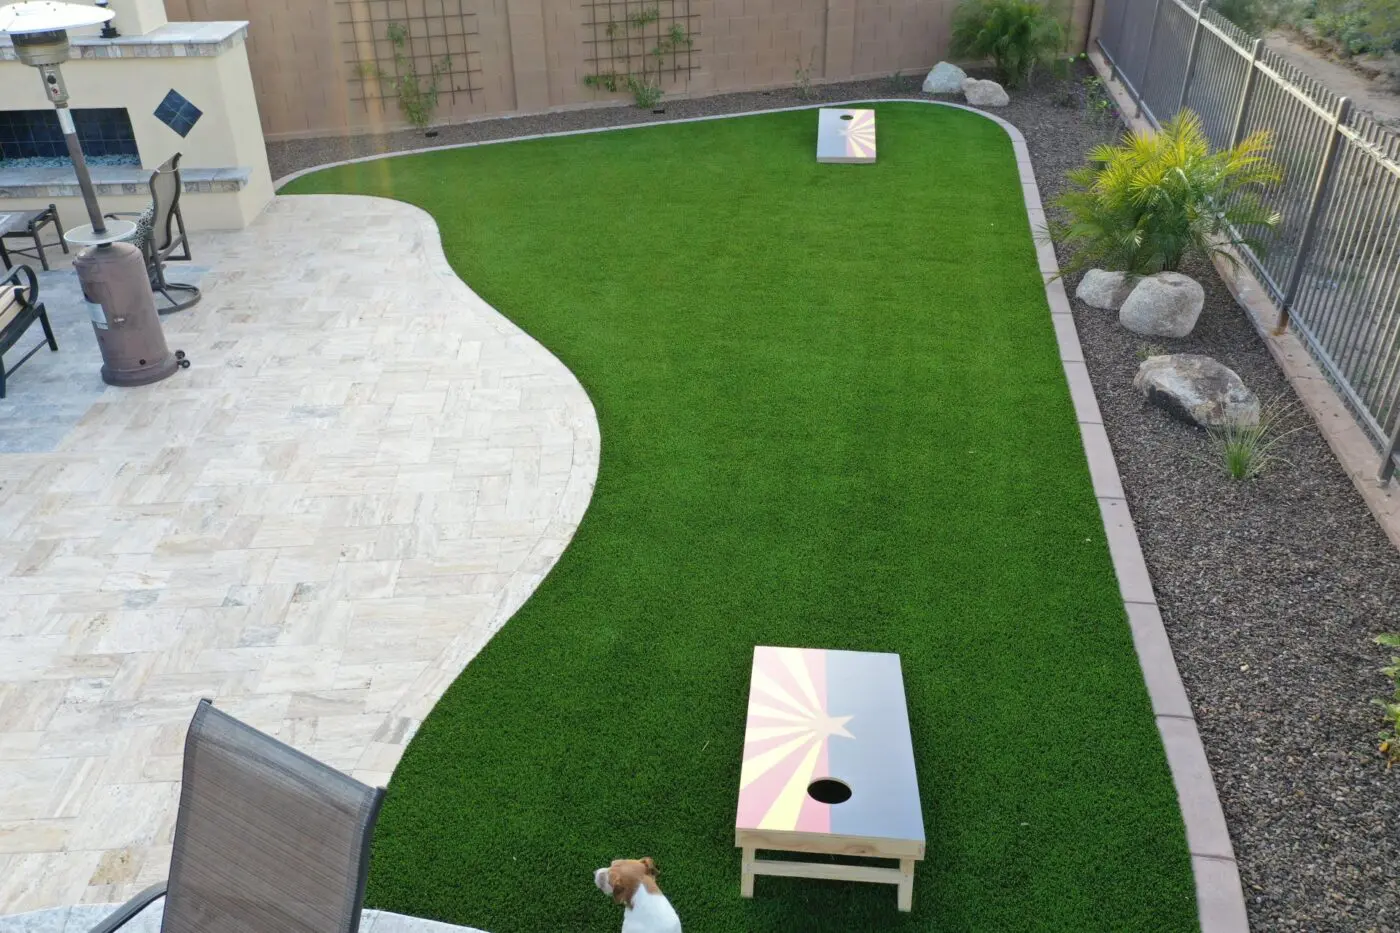 A backyard with Queen Creek Artificial Grass features two cornhole boards on a lush pet turf lawn. Bordered by stone pavers and a few plants, the space is perfect for outdoor fun. A small dog stands at the edge of the lawn, while a wire fence provides separation from the neighbors.